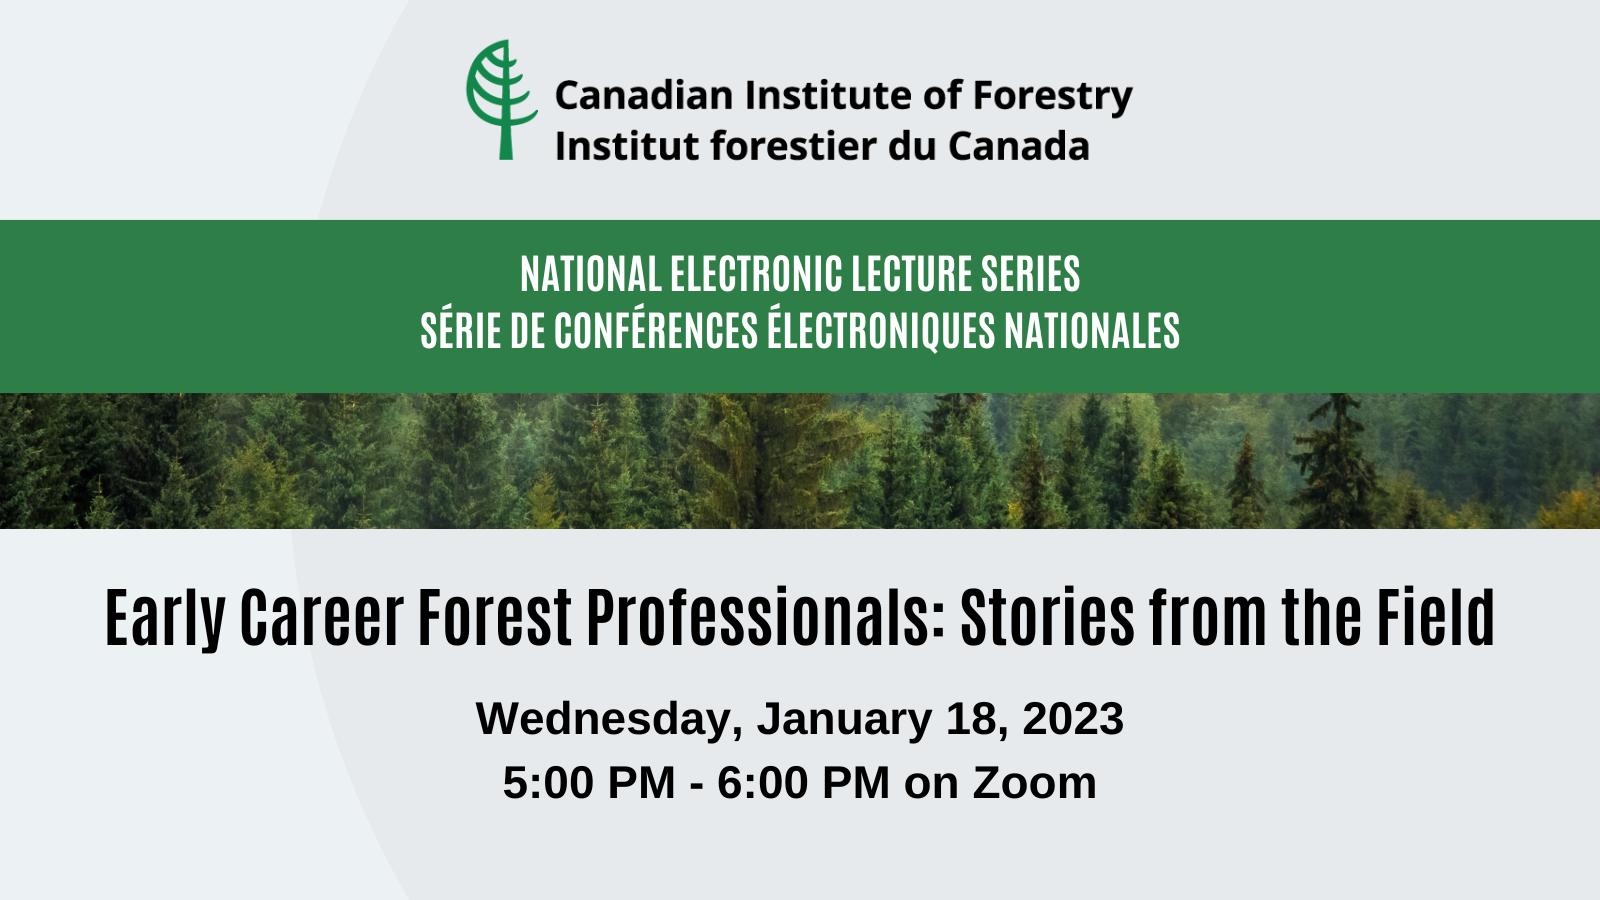 Canadian Institute of Forestry webinar for early career forest professionals details.